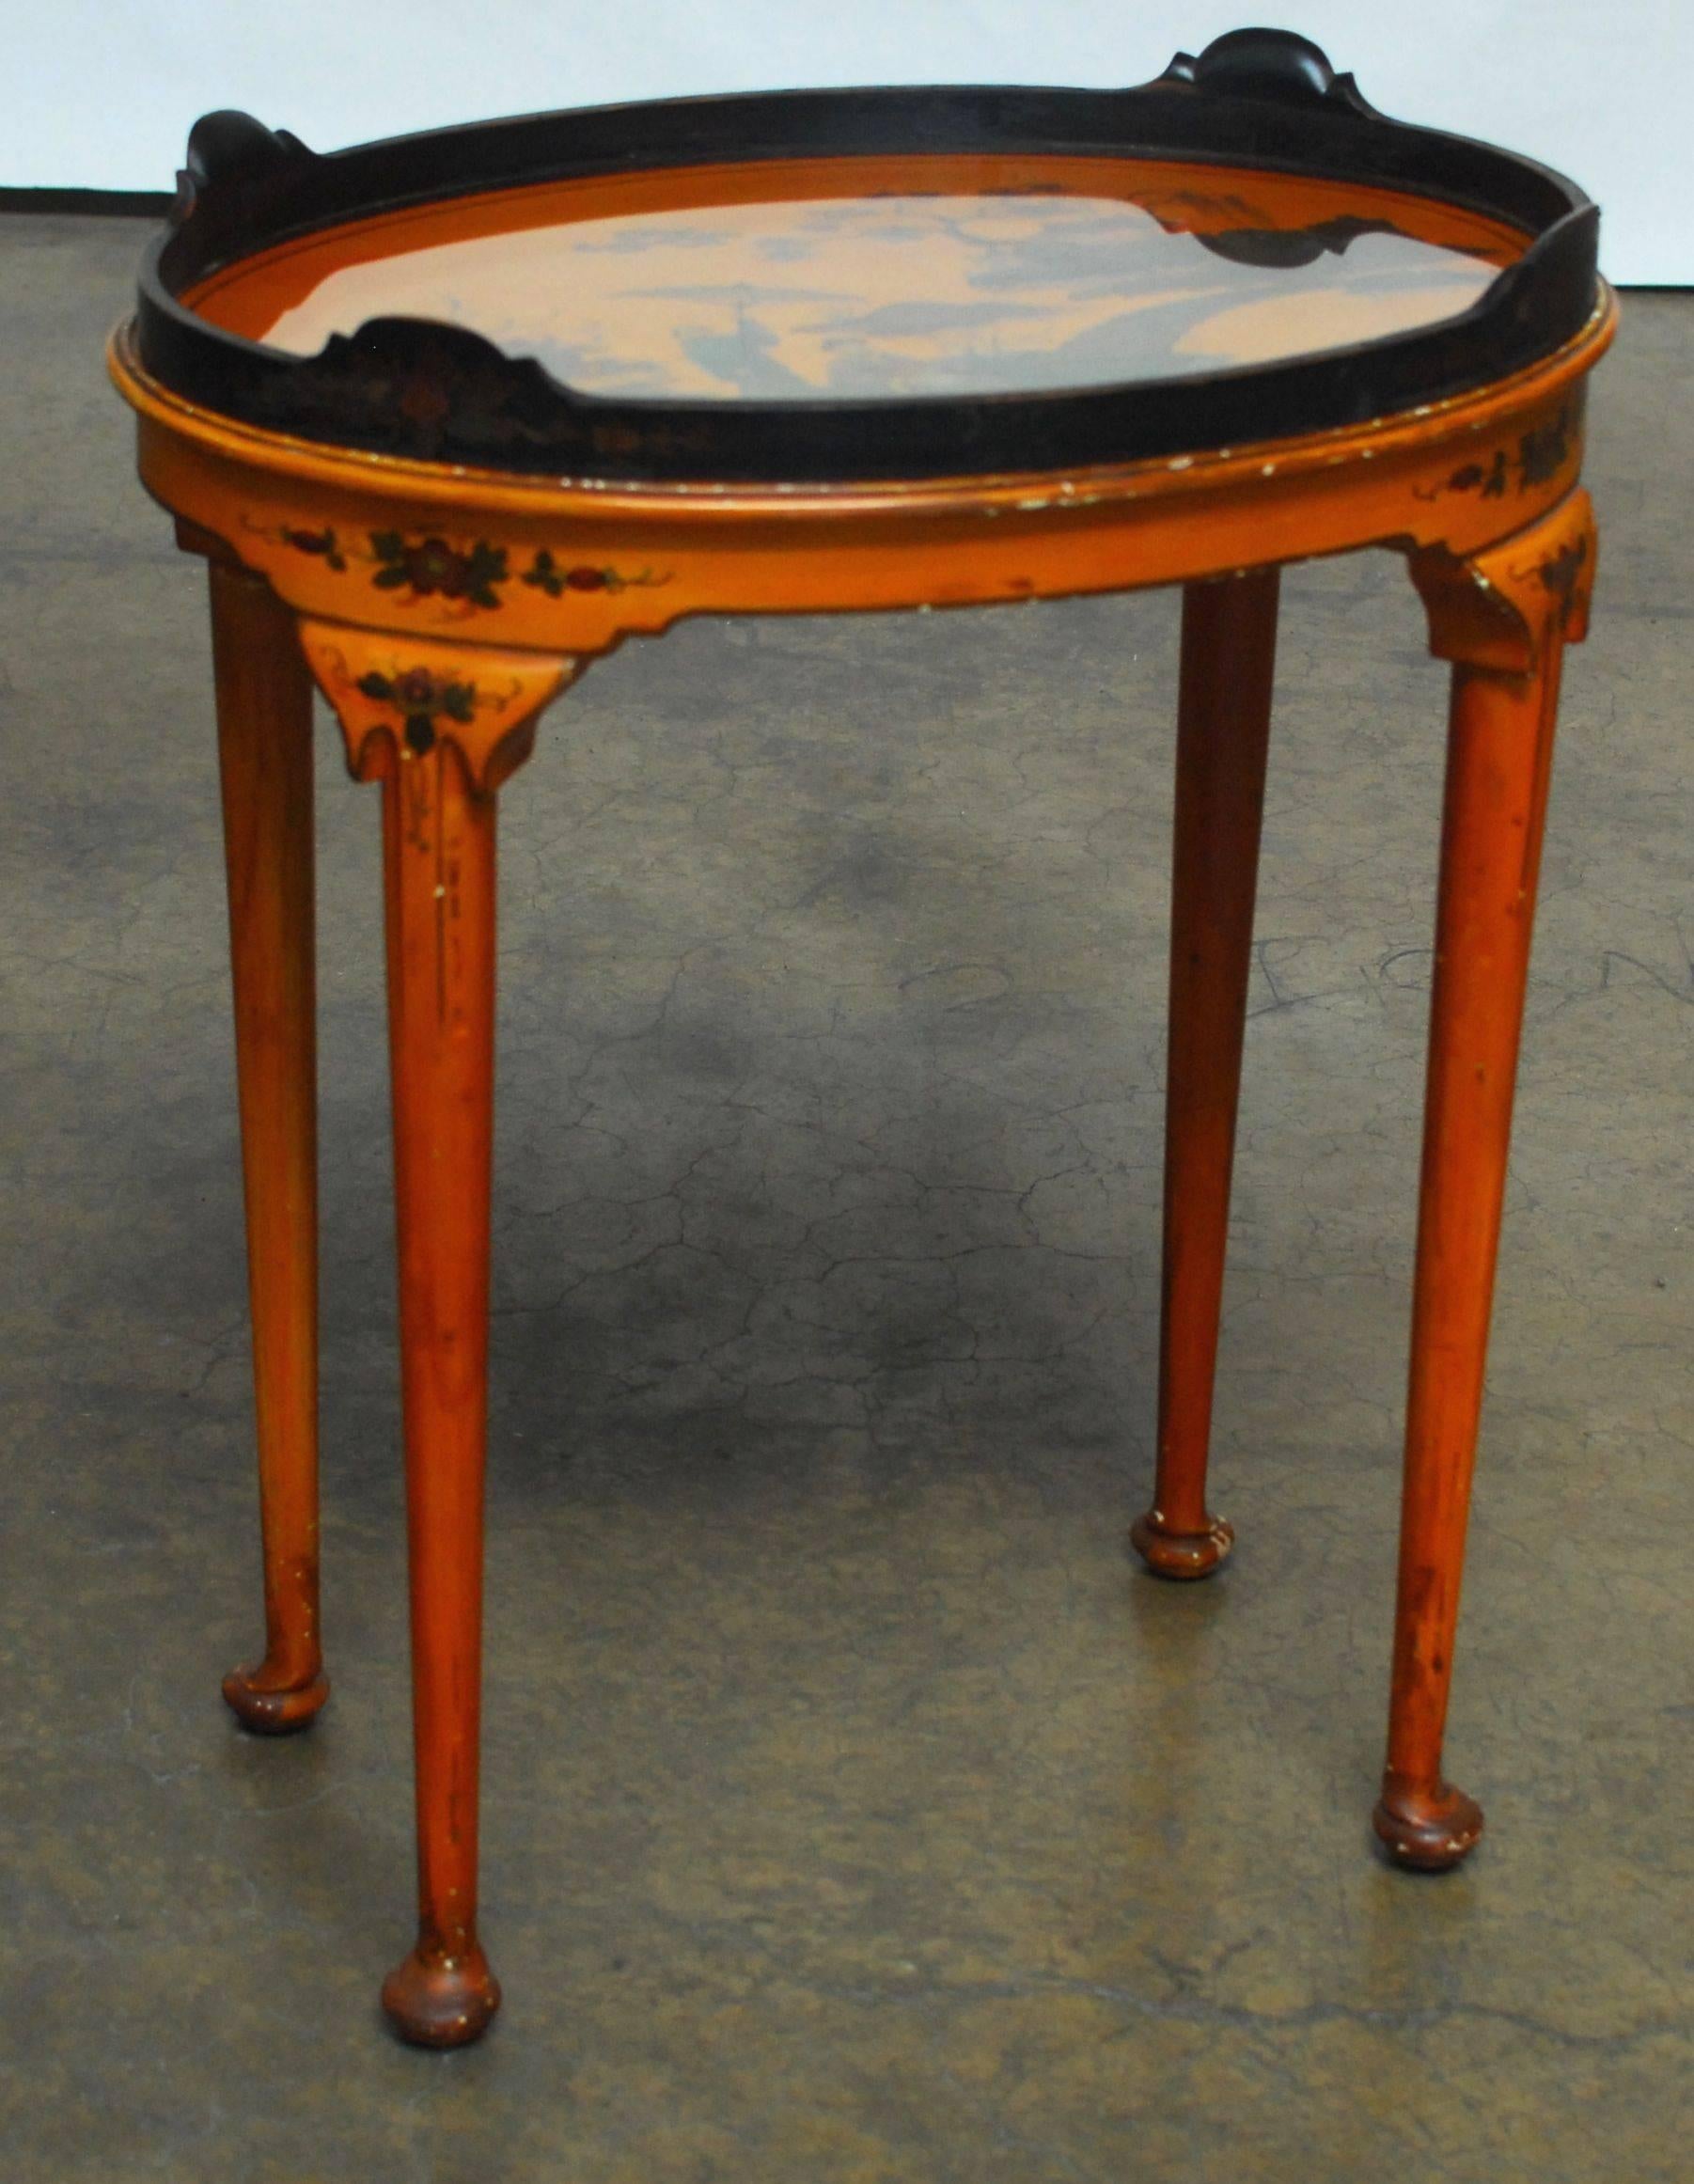 Rare, Queen Anne style oval tea table featuring a removable glass tray top and chinoiserie decoration. Finished in a warm faded orange lacquer sitting on long, tapered legs with pad feet. Floral painted detail on tray, apron and legs.
  